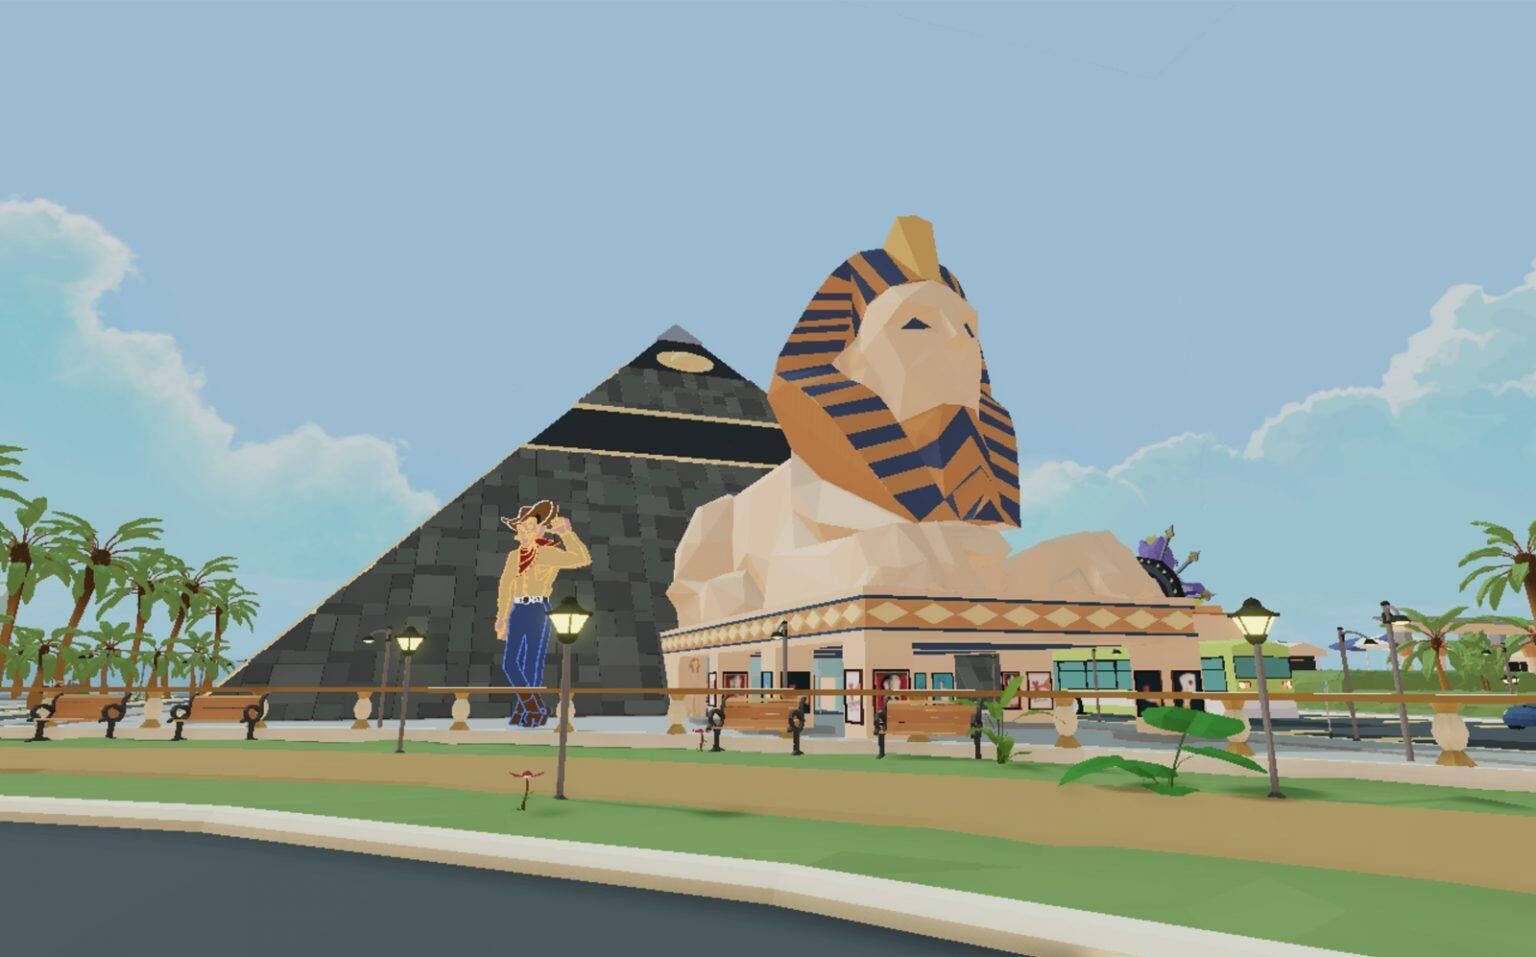 The sphynx and pyramid in Decentraland's fashion street.